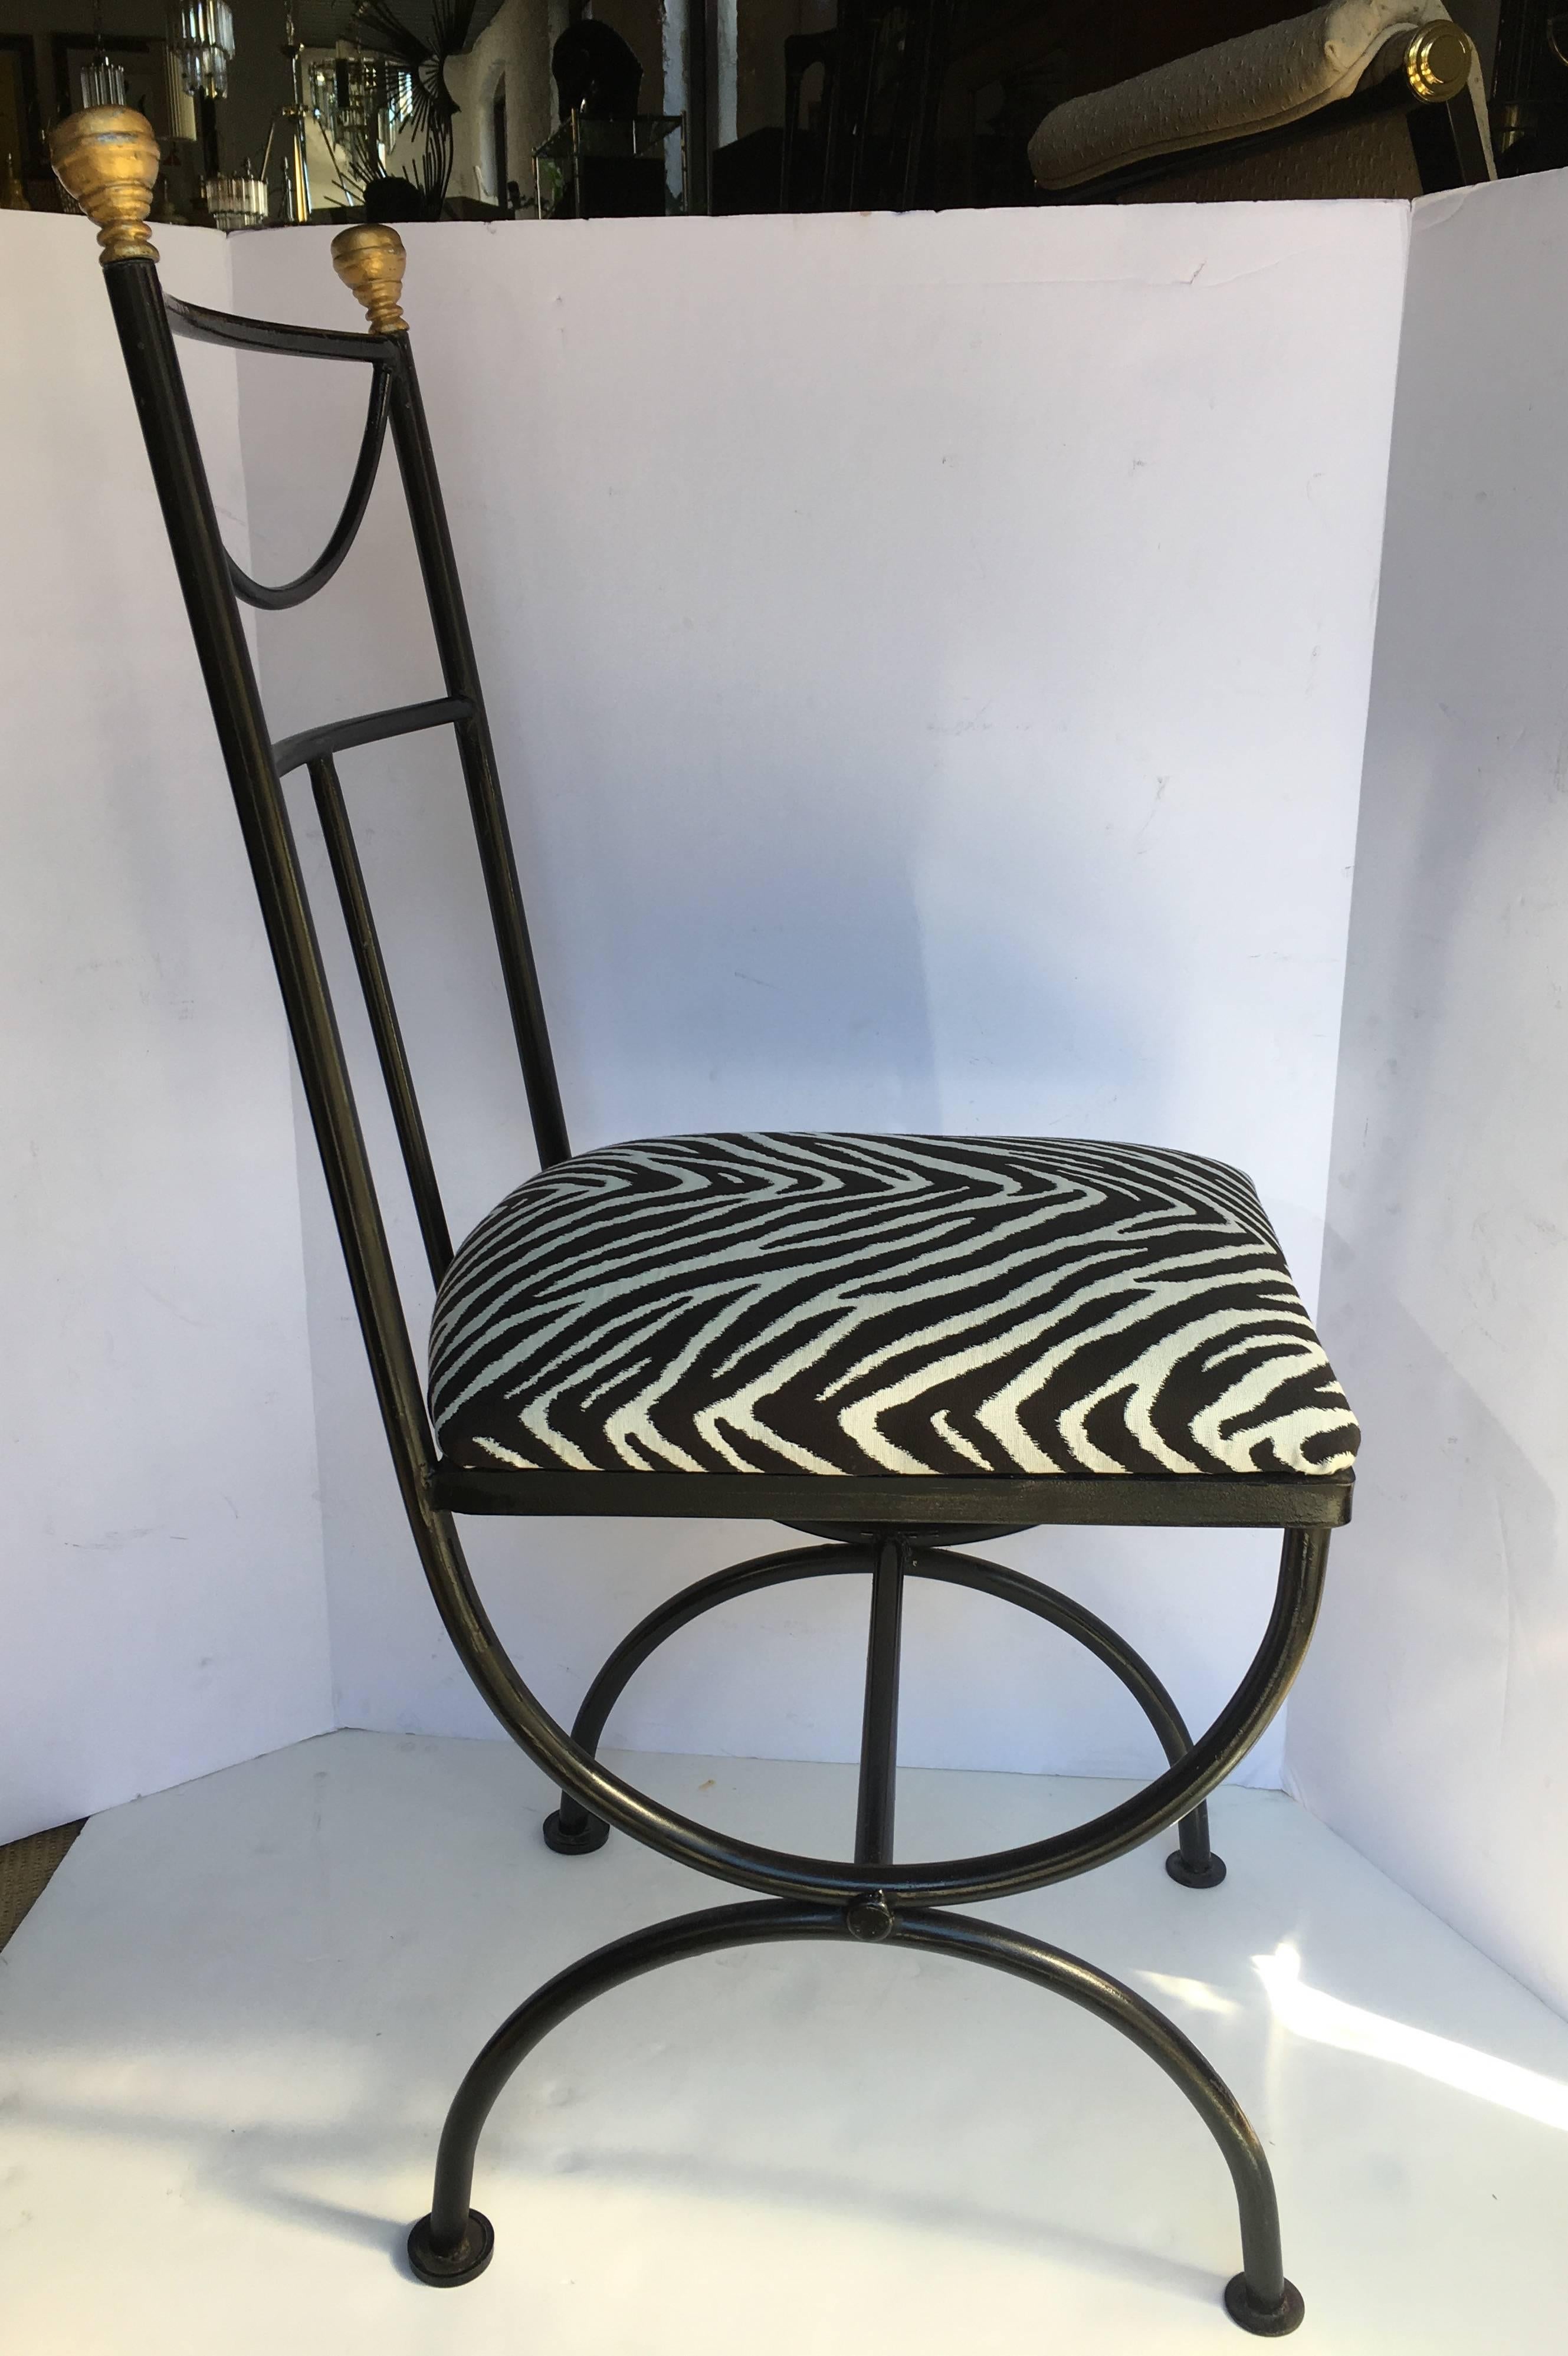 Mid-Century continental wrought iron "Savonarola" style accent or desk chair by Kessler. Black painted metal frame features a draped back design with gilt gold painted finials. New animal print upholstery.